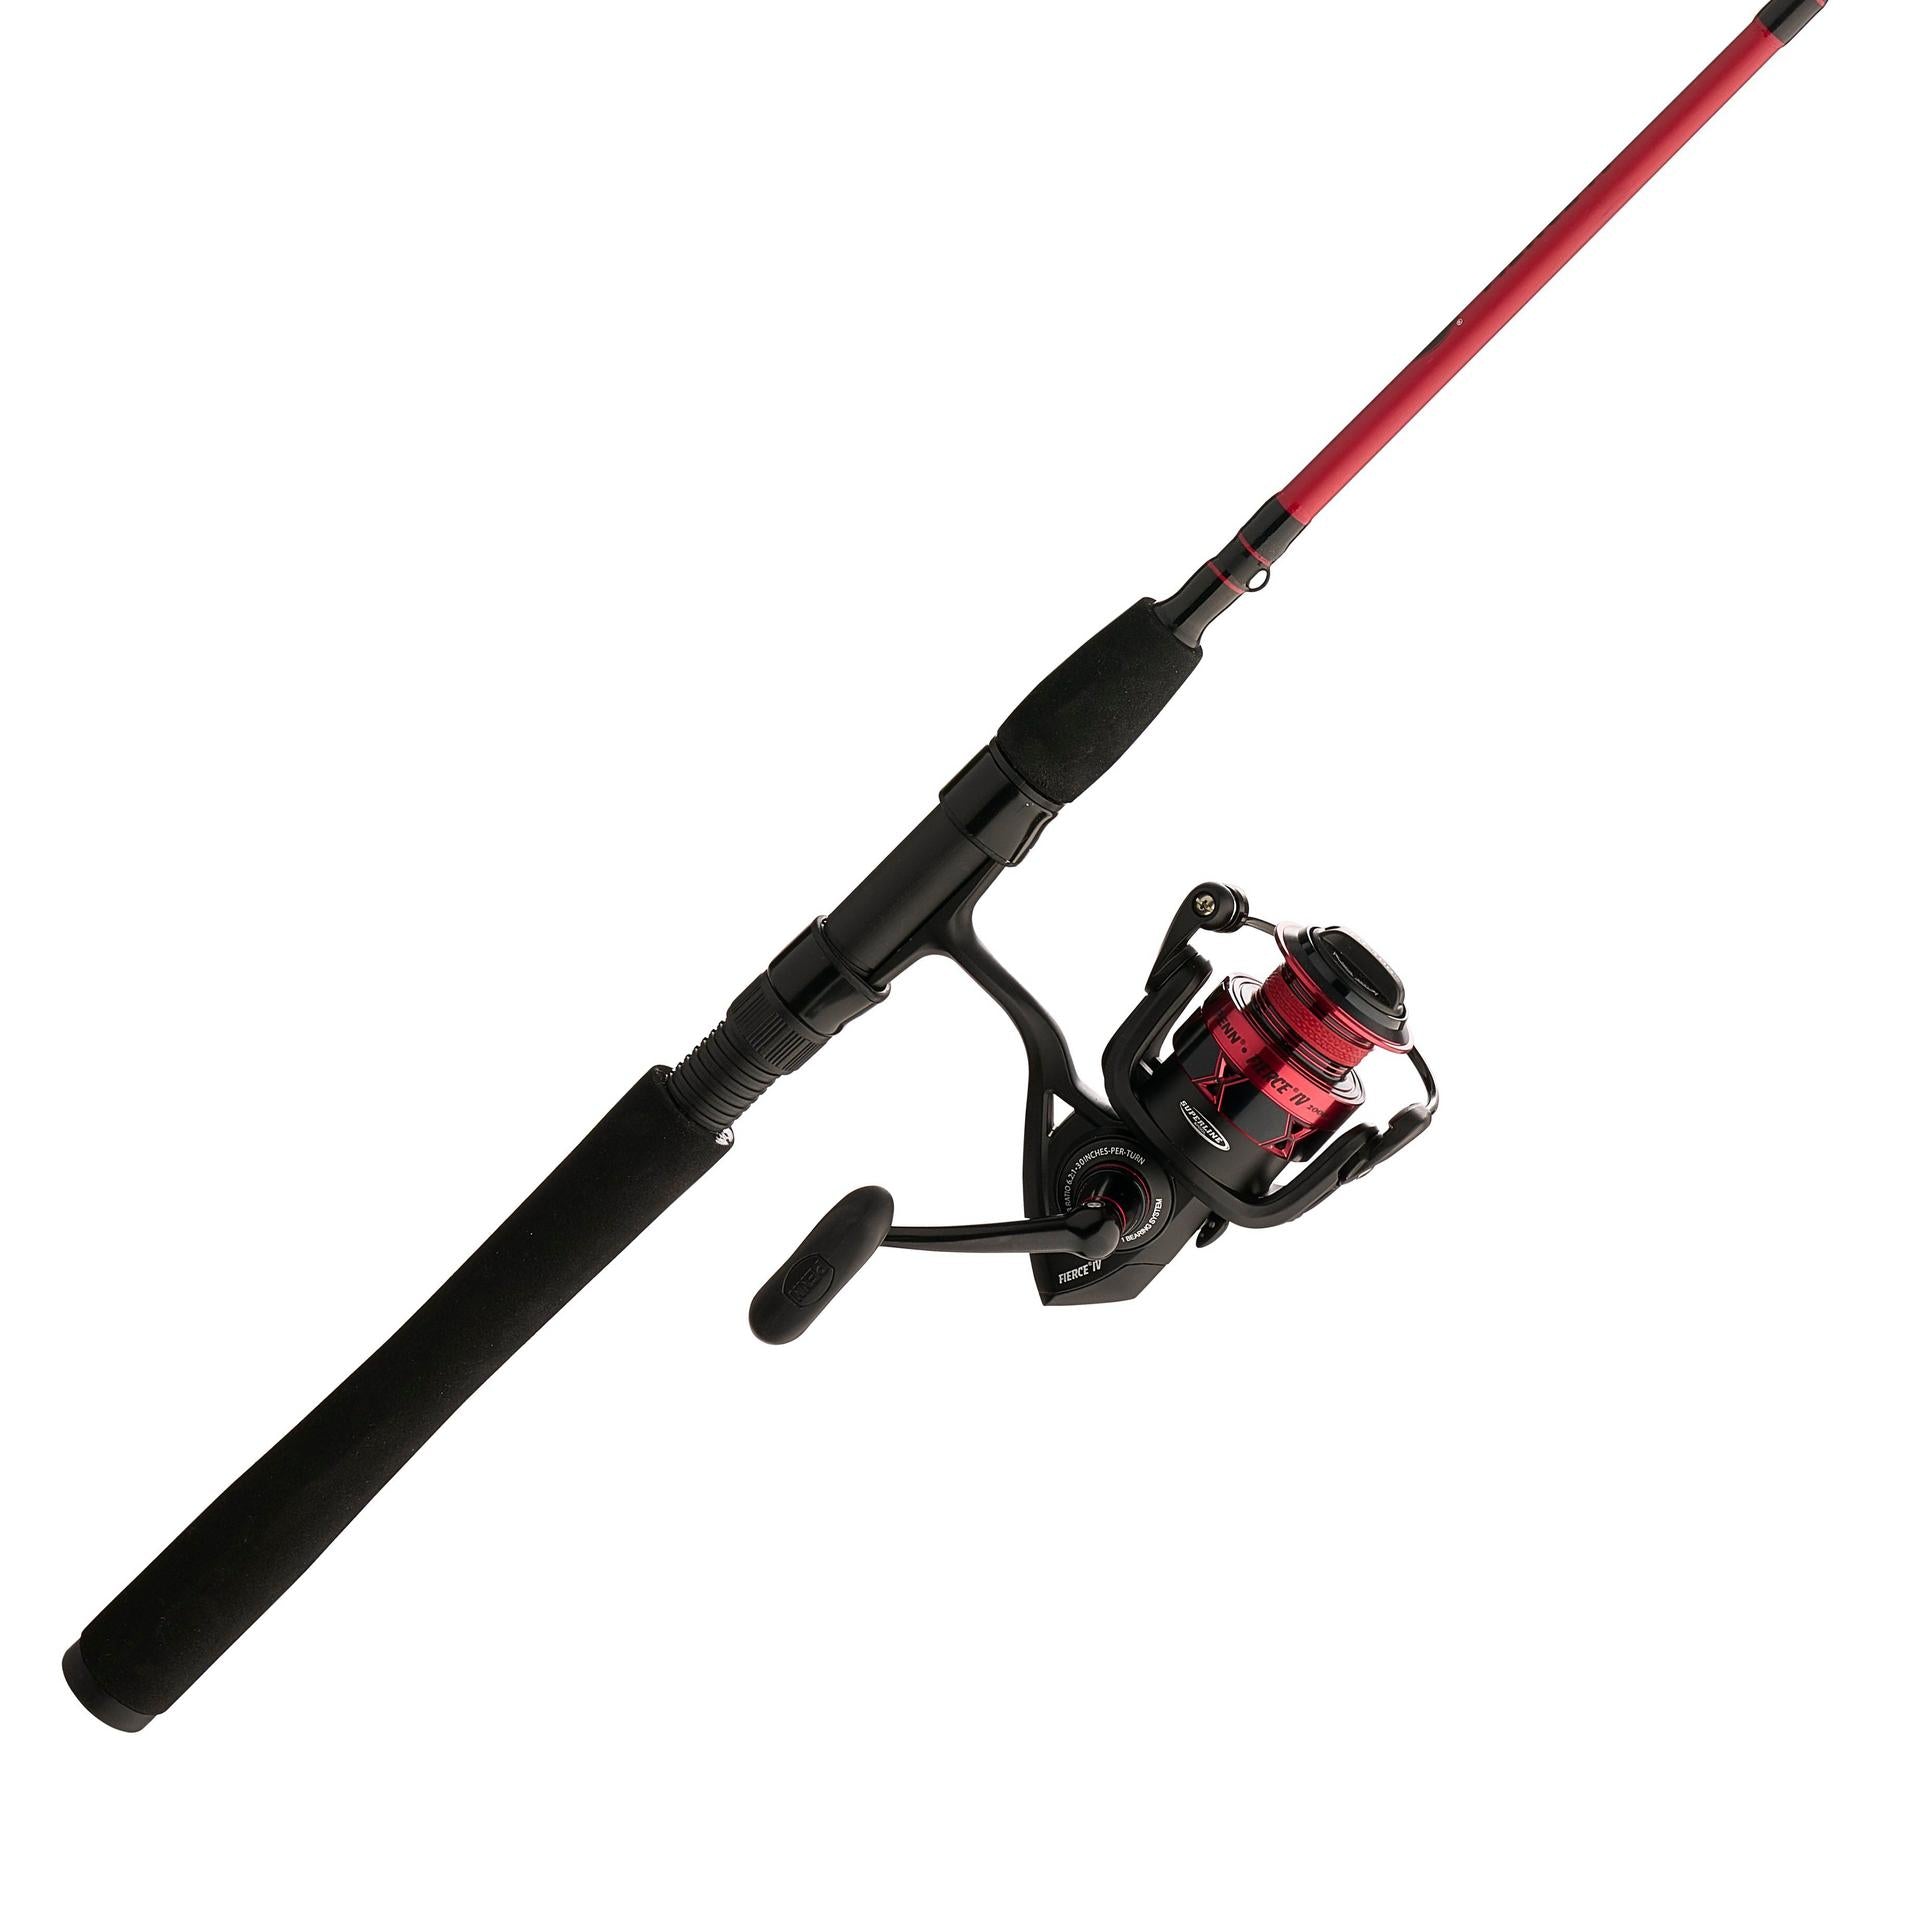 Tailored Tackle Universal Multispecies Rod and Reel Combo Fishing Pole |  Freshwater & Inshore Saltwater | Poles 6 Ft 6 in Rods Medium Fast Action 